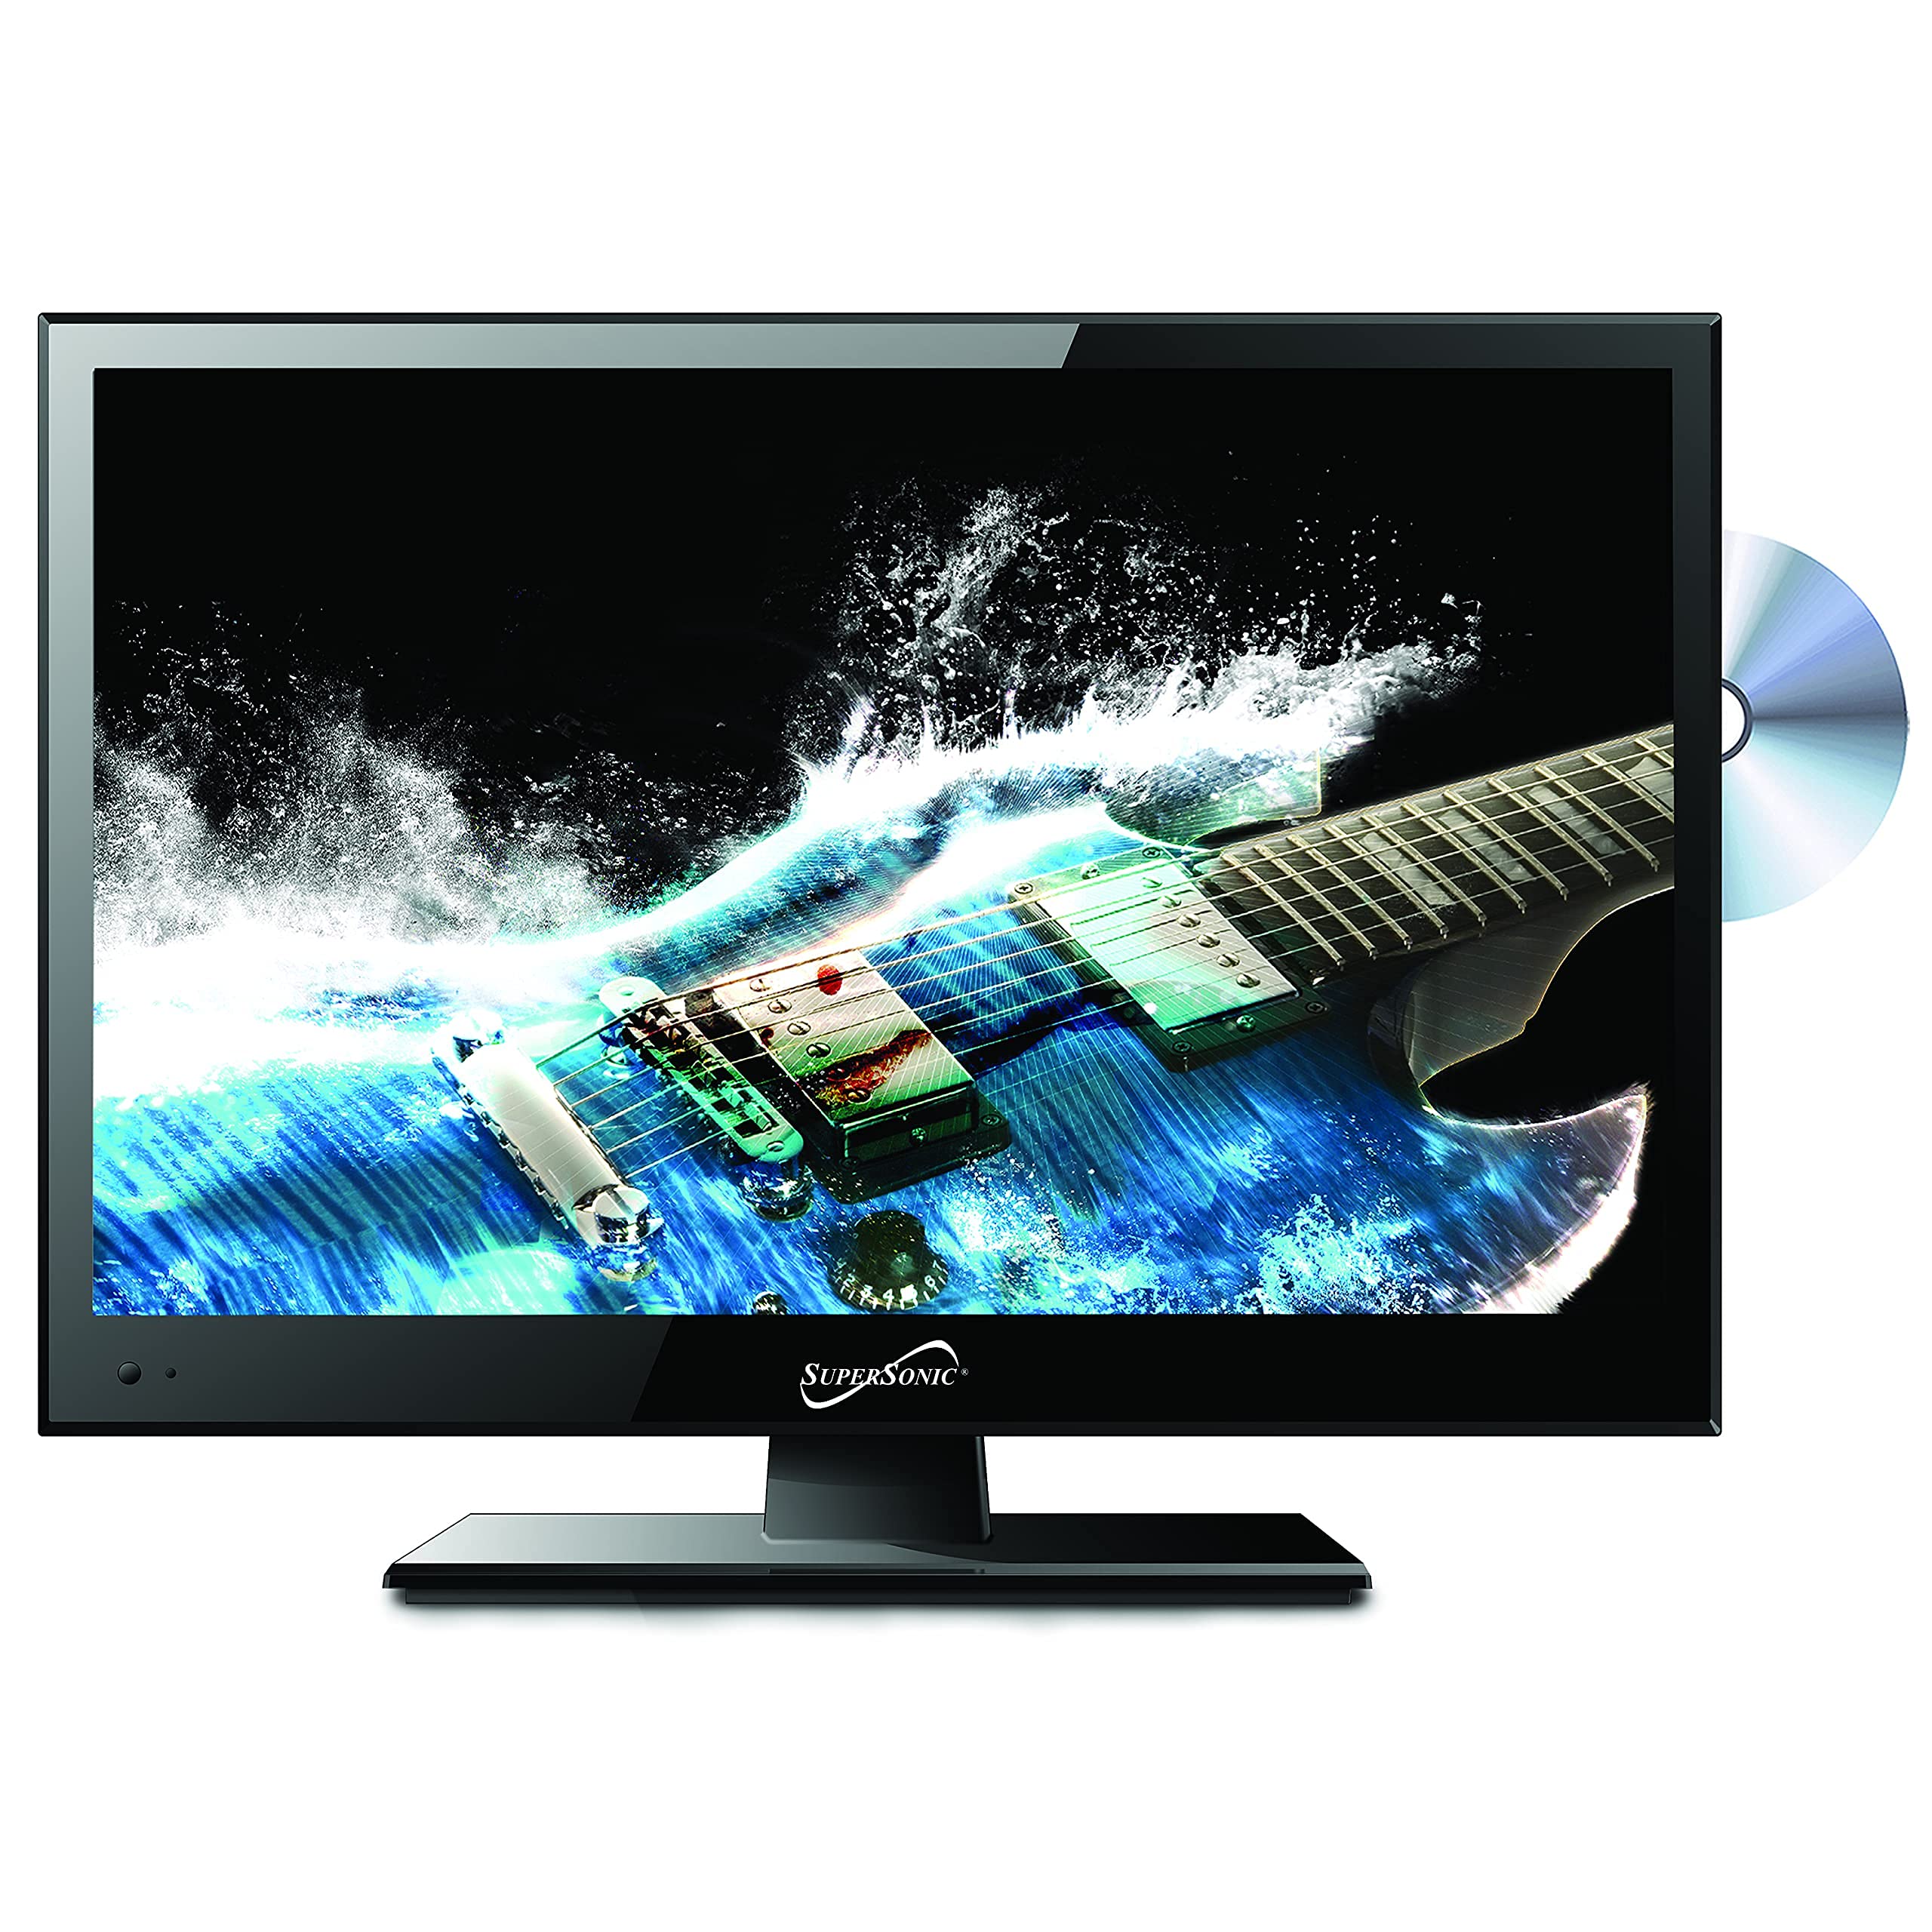 SuperSonic SC-1512 LED Widescreen HDTV & Monitor 15.6